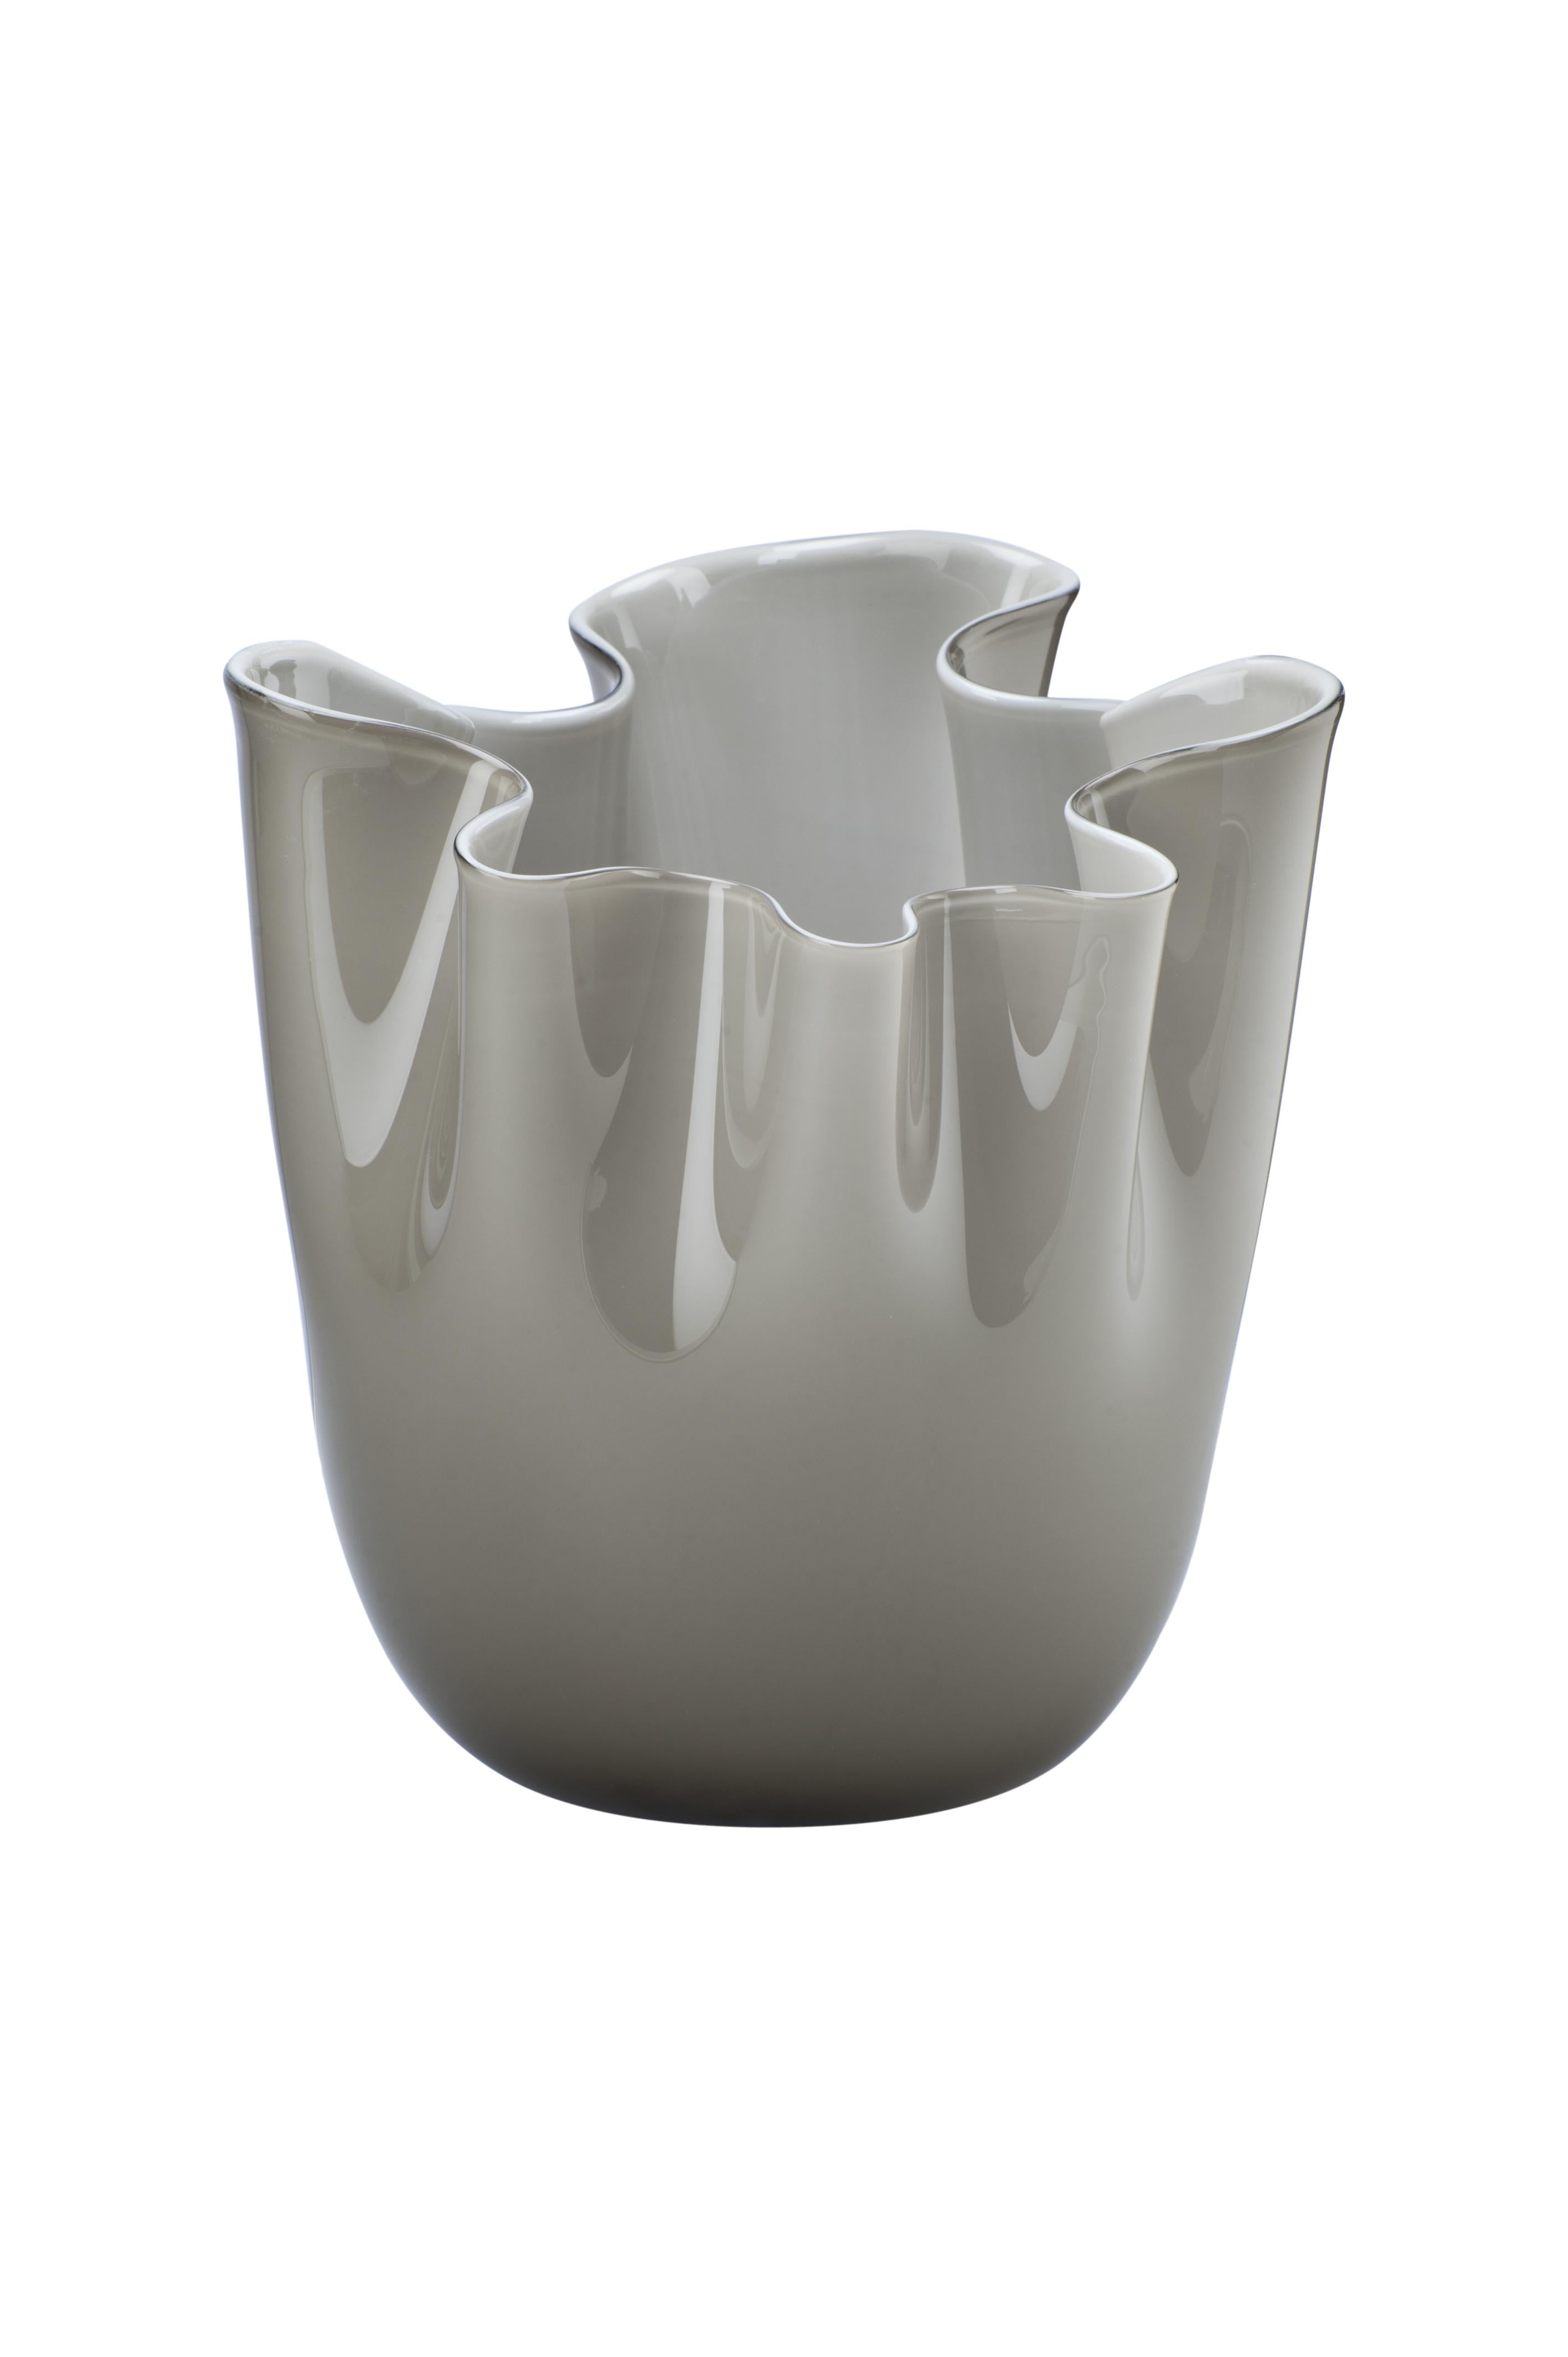 Fazzoletto glass vase, designed by Fulvio Bianconi and Paolo Venini and manufactured by Venini, is available in three different sizes. Original designed in 1948. Indoor use only.

Dimensions: Ø 23 cm, H 31 cm.